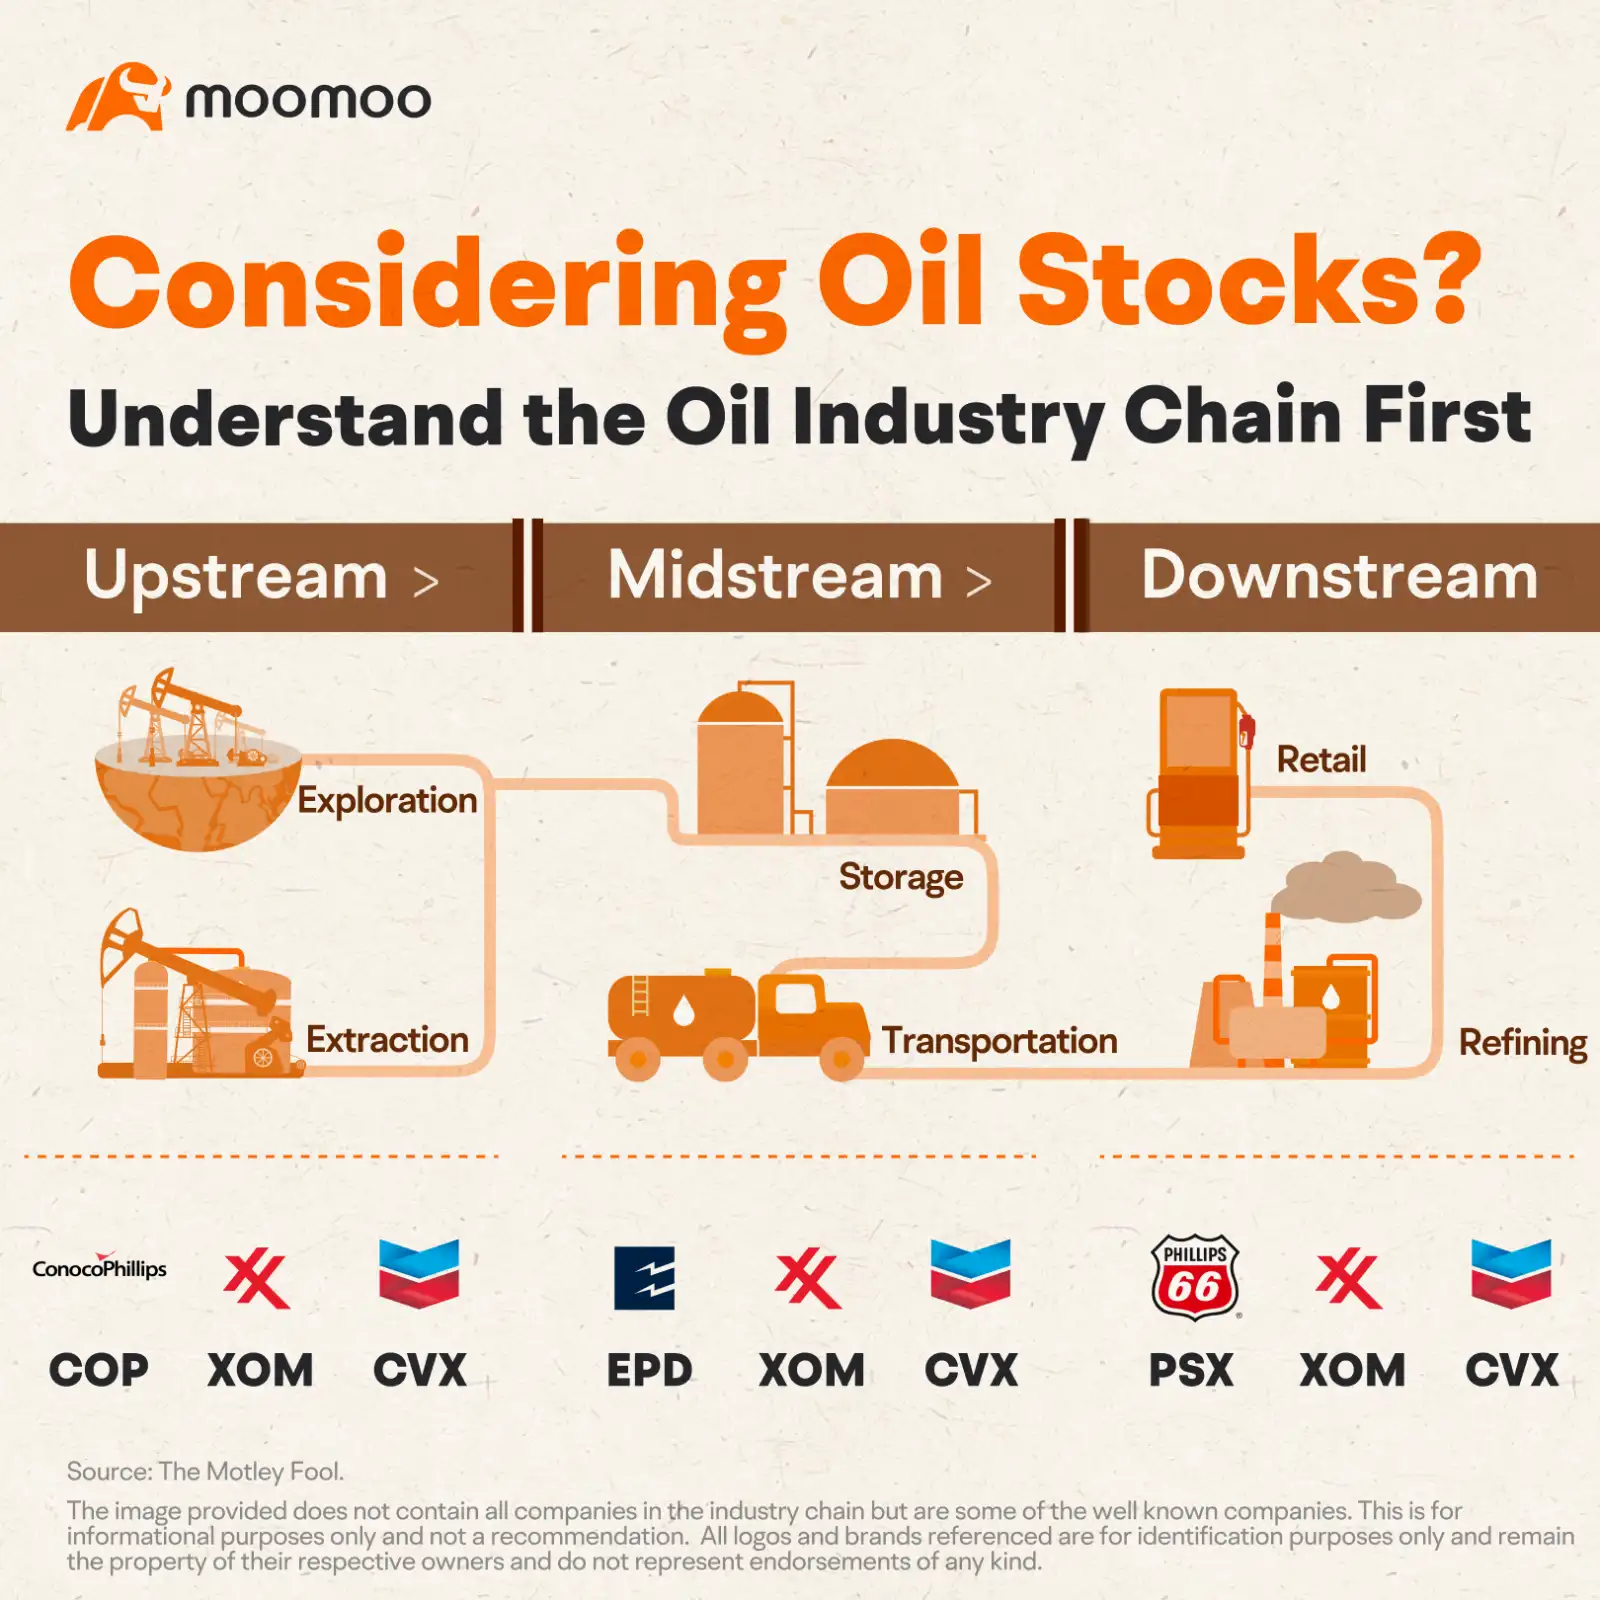 Can Oil Stocks Benefit from Rising Oil Prices?